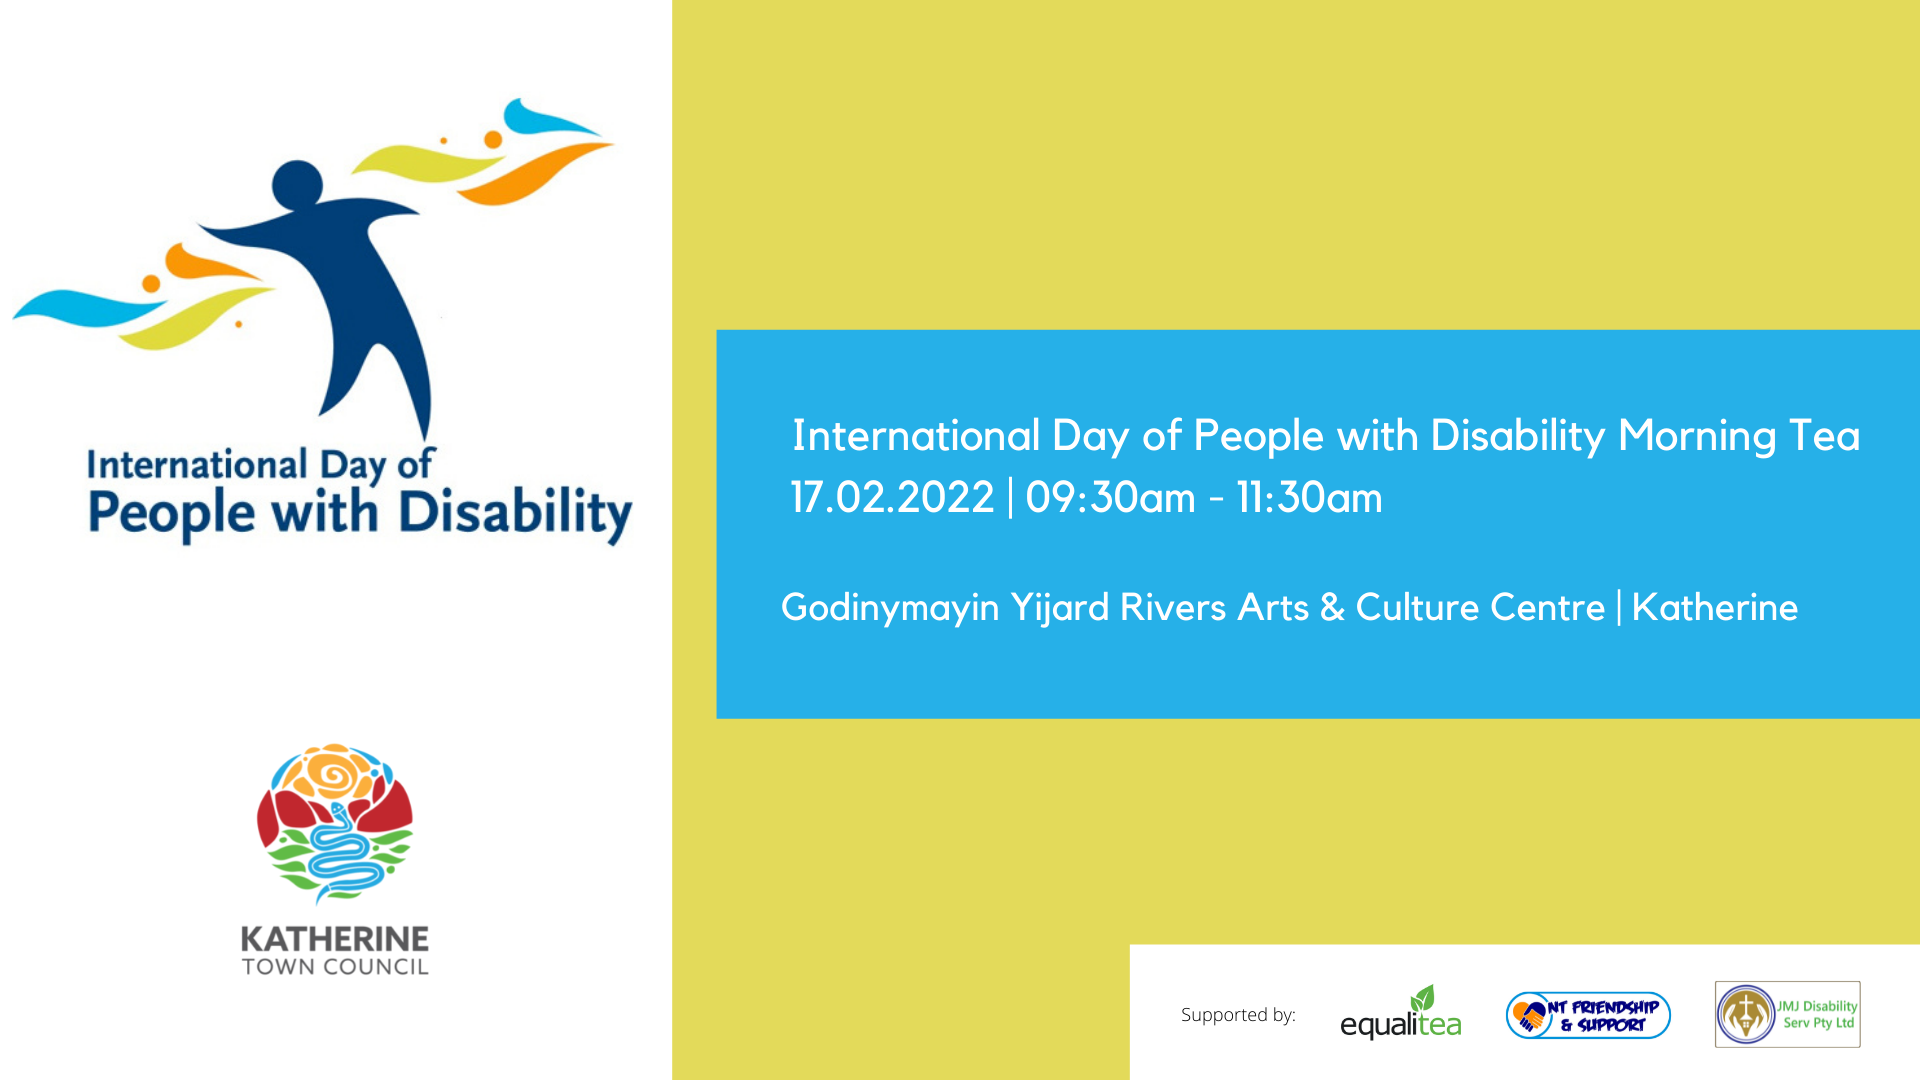 Media Release - International Day of People with Disability Awards -17